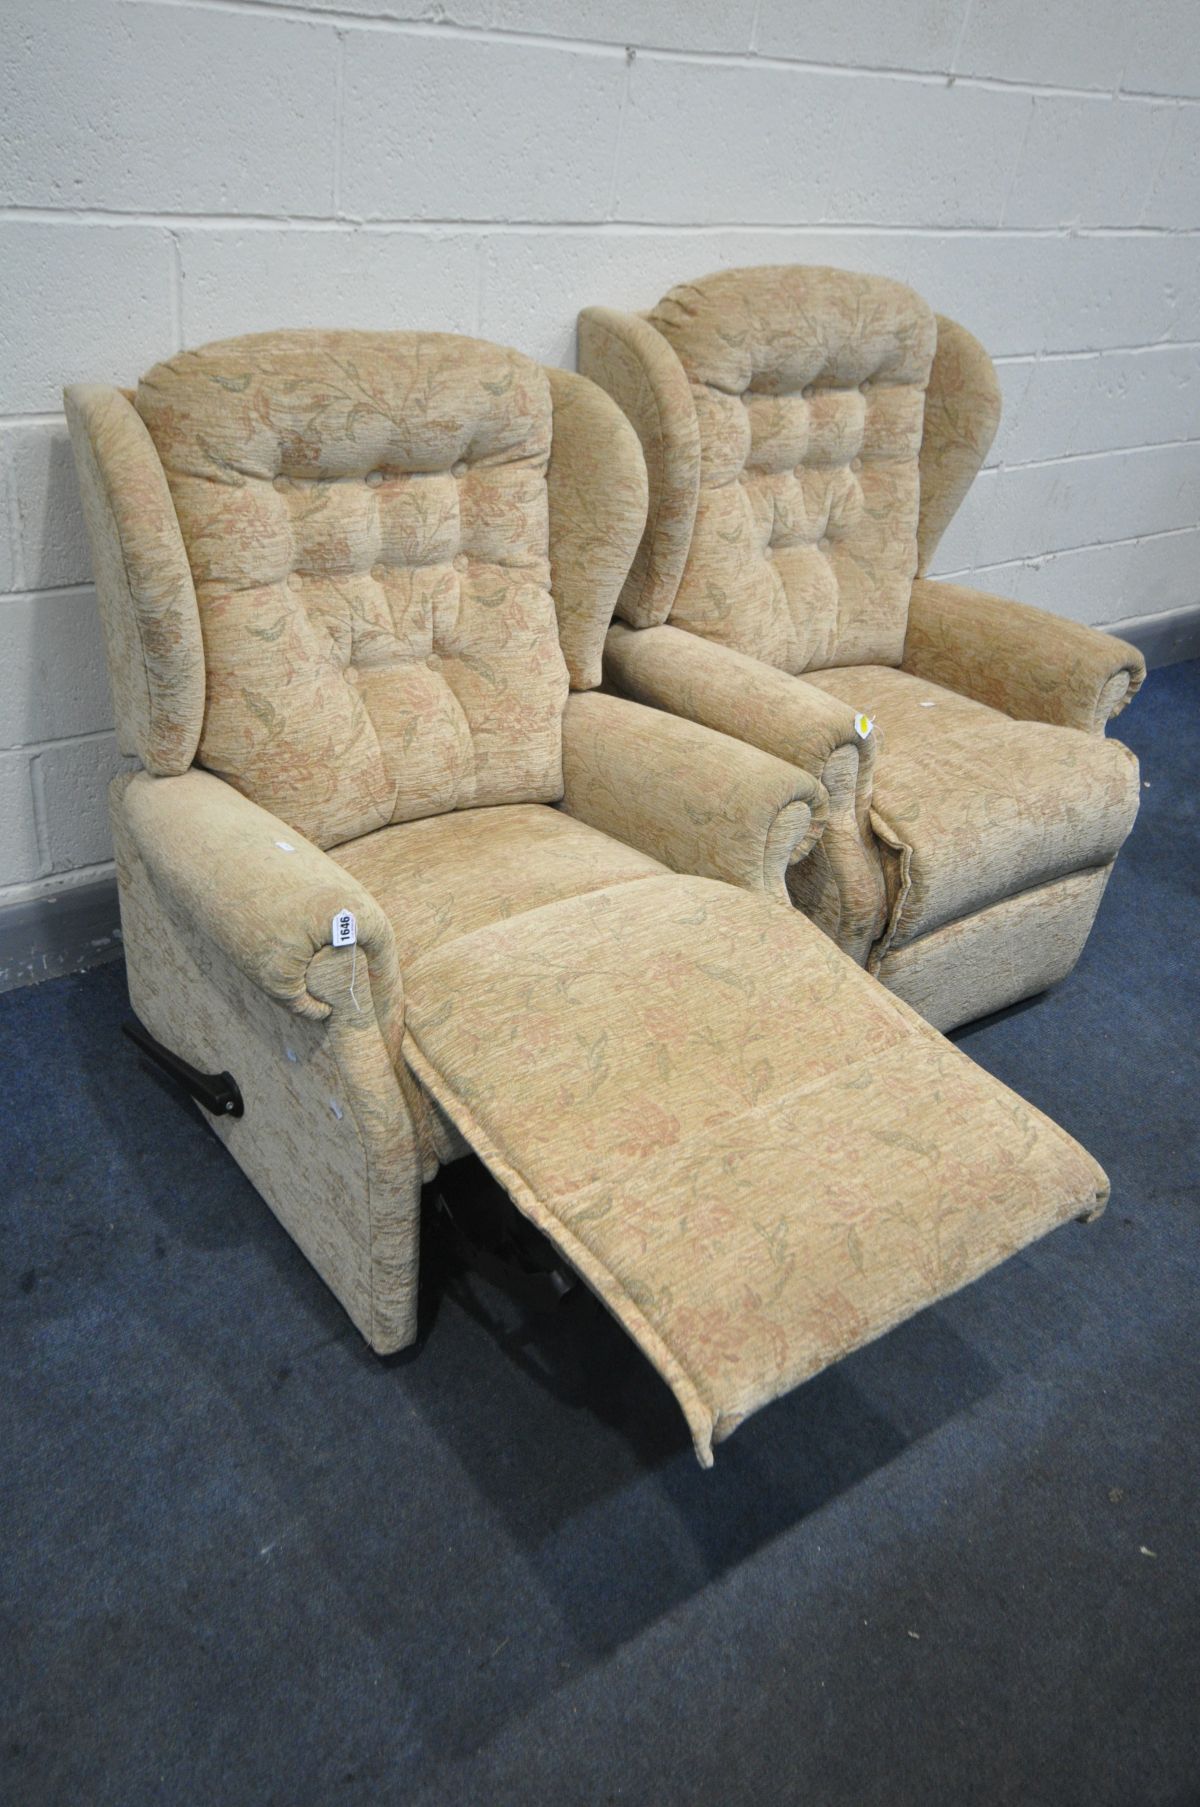 A PAIR OF FLORAL BIEGE UPHOLSTERED MANUAL RECLINING ARMCHAIRS - Image 2 of 2